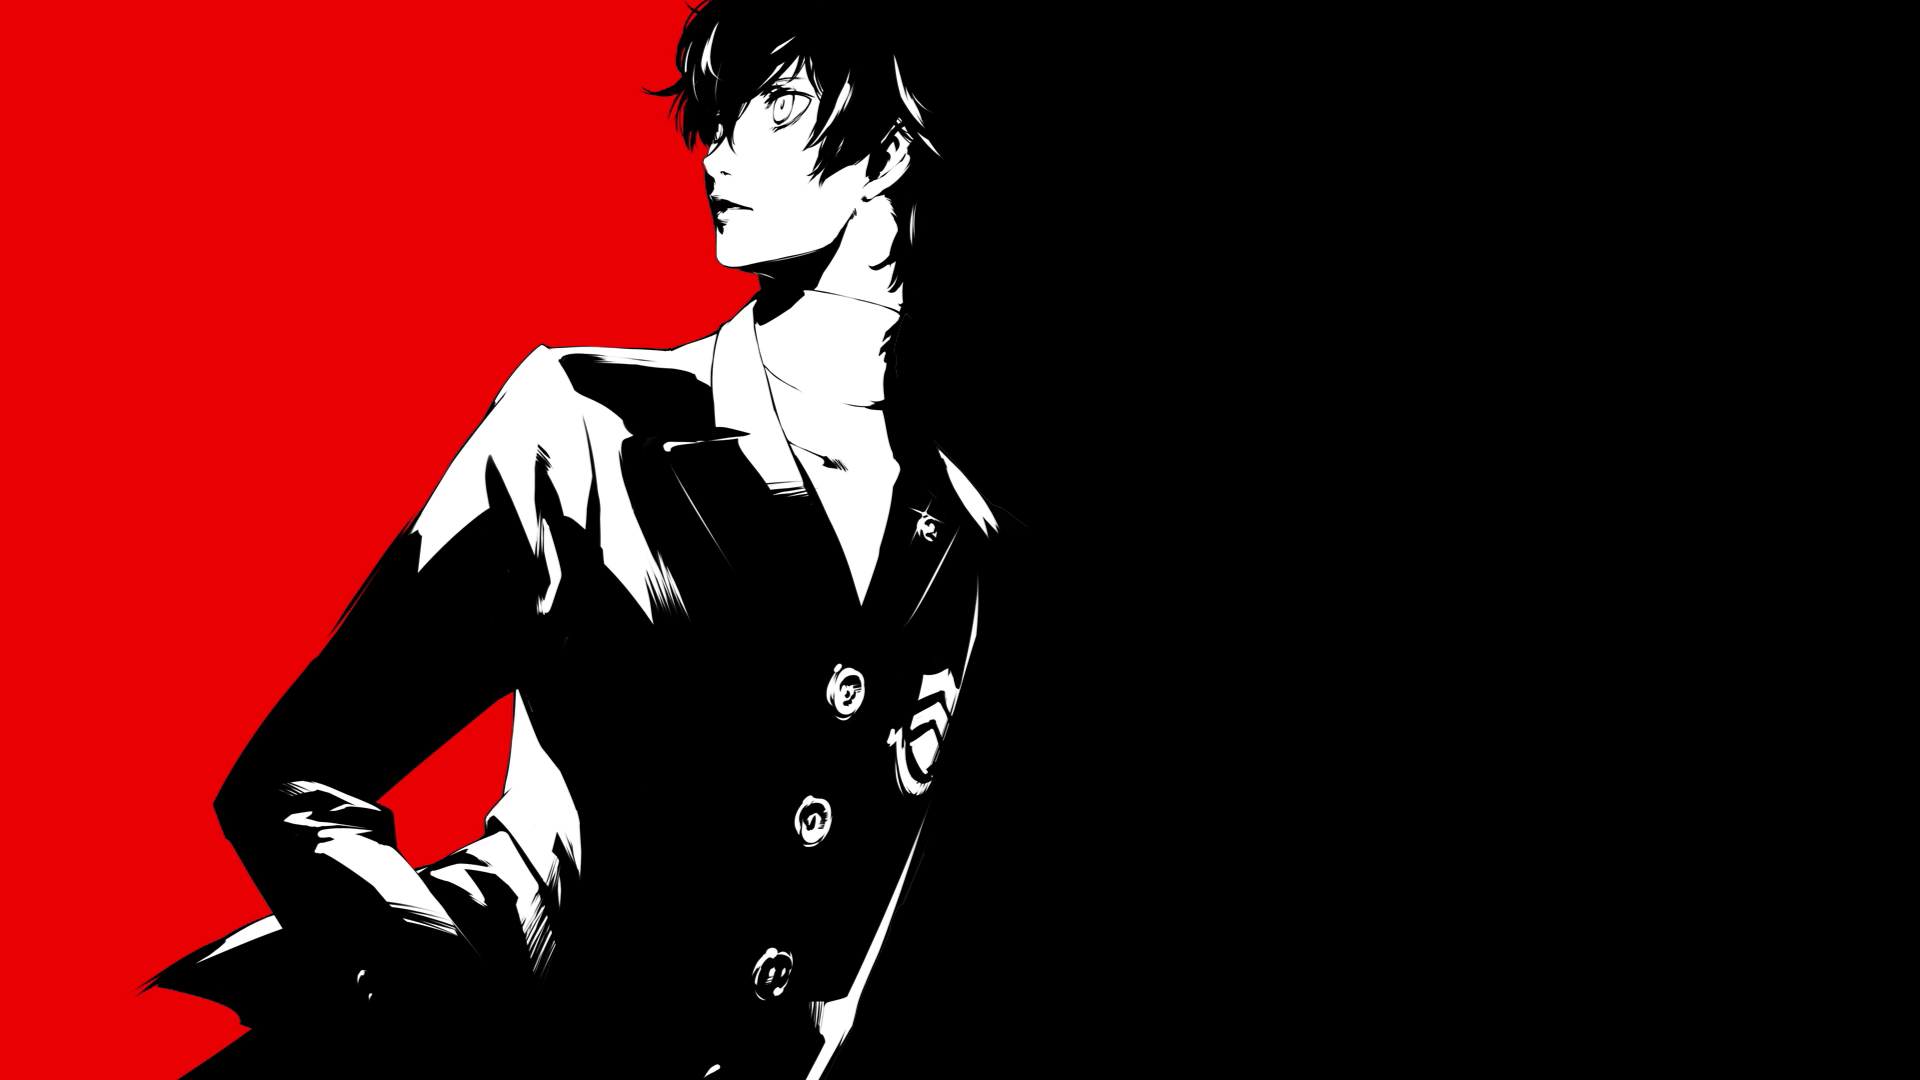 Persona 5 Wallpapers Pictures Images HD Wallpapers Download Free Images Wallpaper [wallpaper981.blogspot.com]